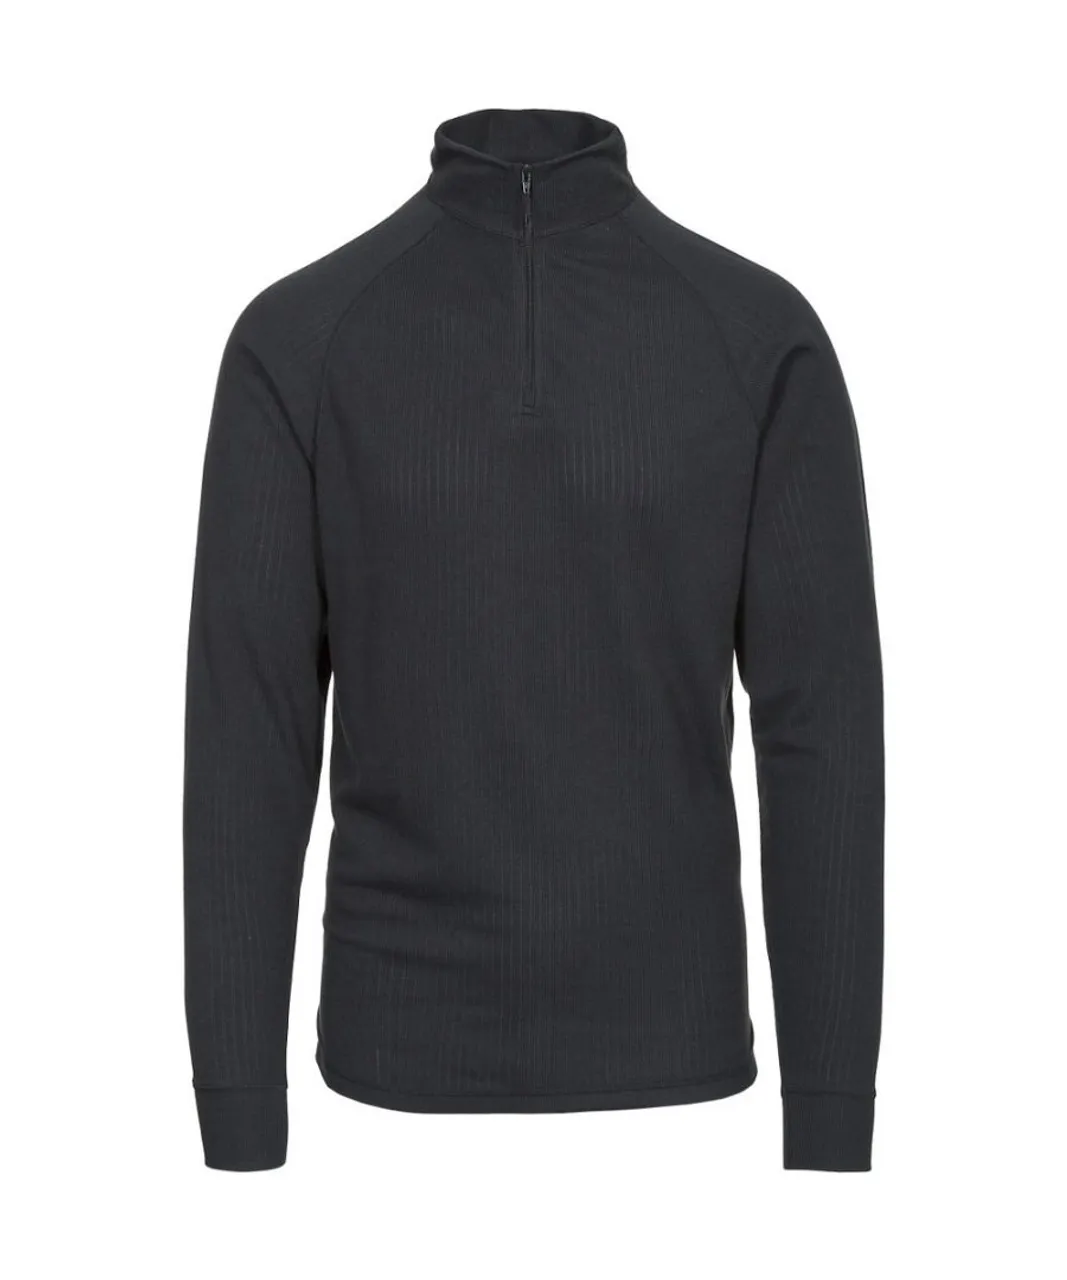 Trespass Mens & Womens Wise360 Quick Drying Wicking Base Layer Top - Black